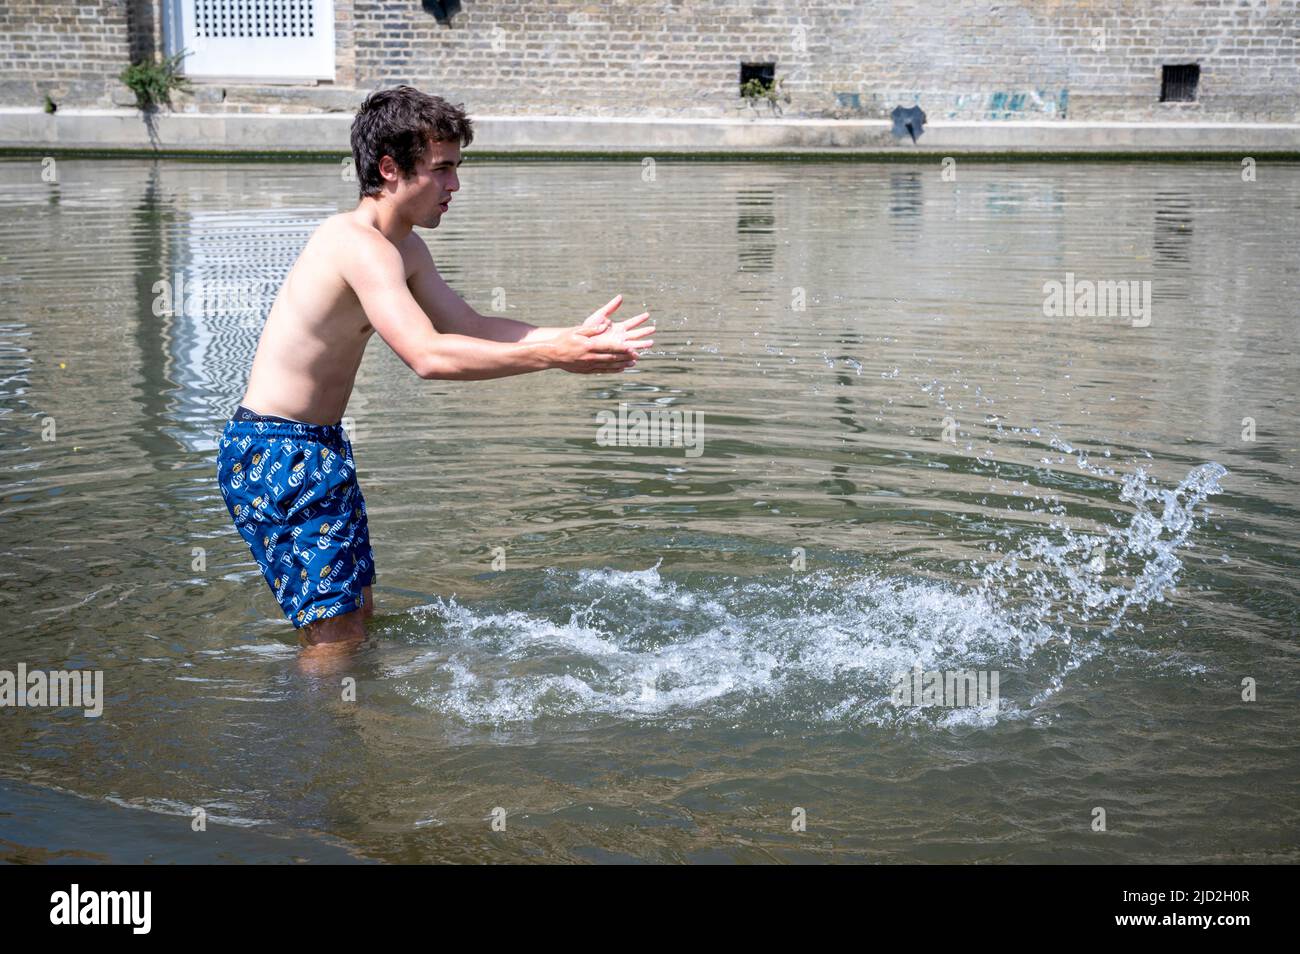 Cambridge, UK. 17th June, 2022. Sawyer Lasof keeps cool in the sunny hot weather by going for a dip in the River Cam. Today is expected to be the hottest day of the year in the UK so far and temperatures are expected to rise above 30c in the heatwave. Credit: Julian Eales/Alamy Live News Stock Photo